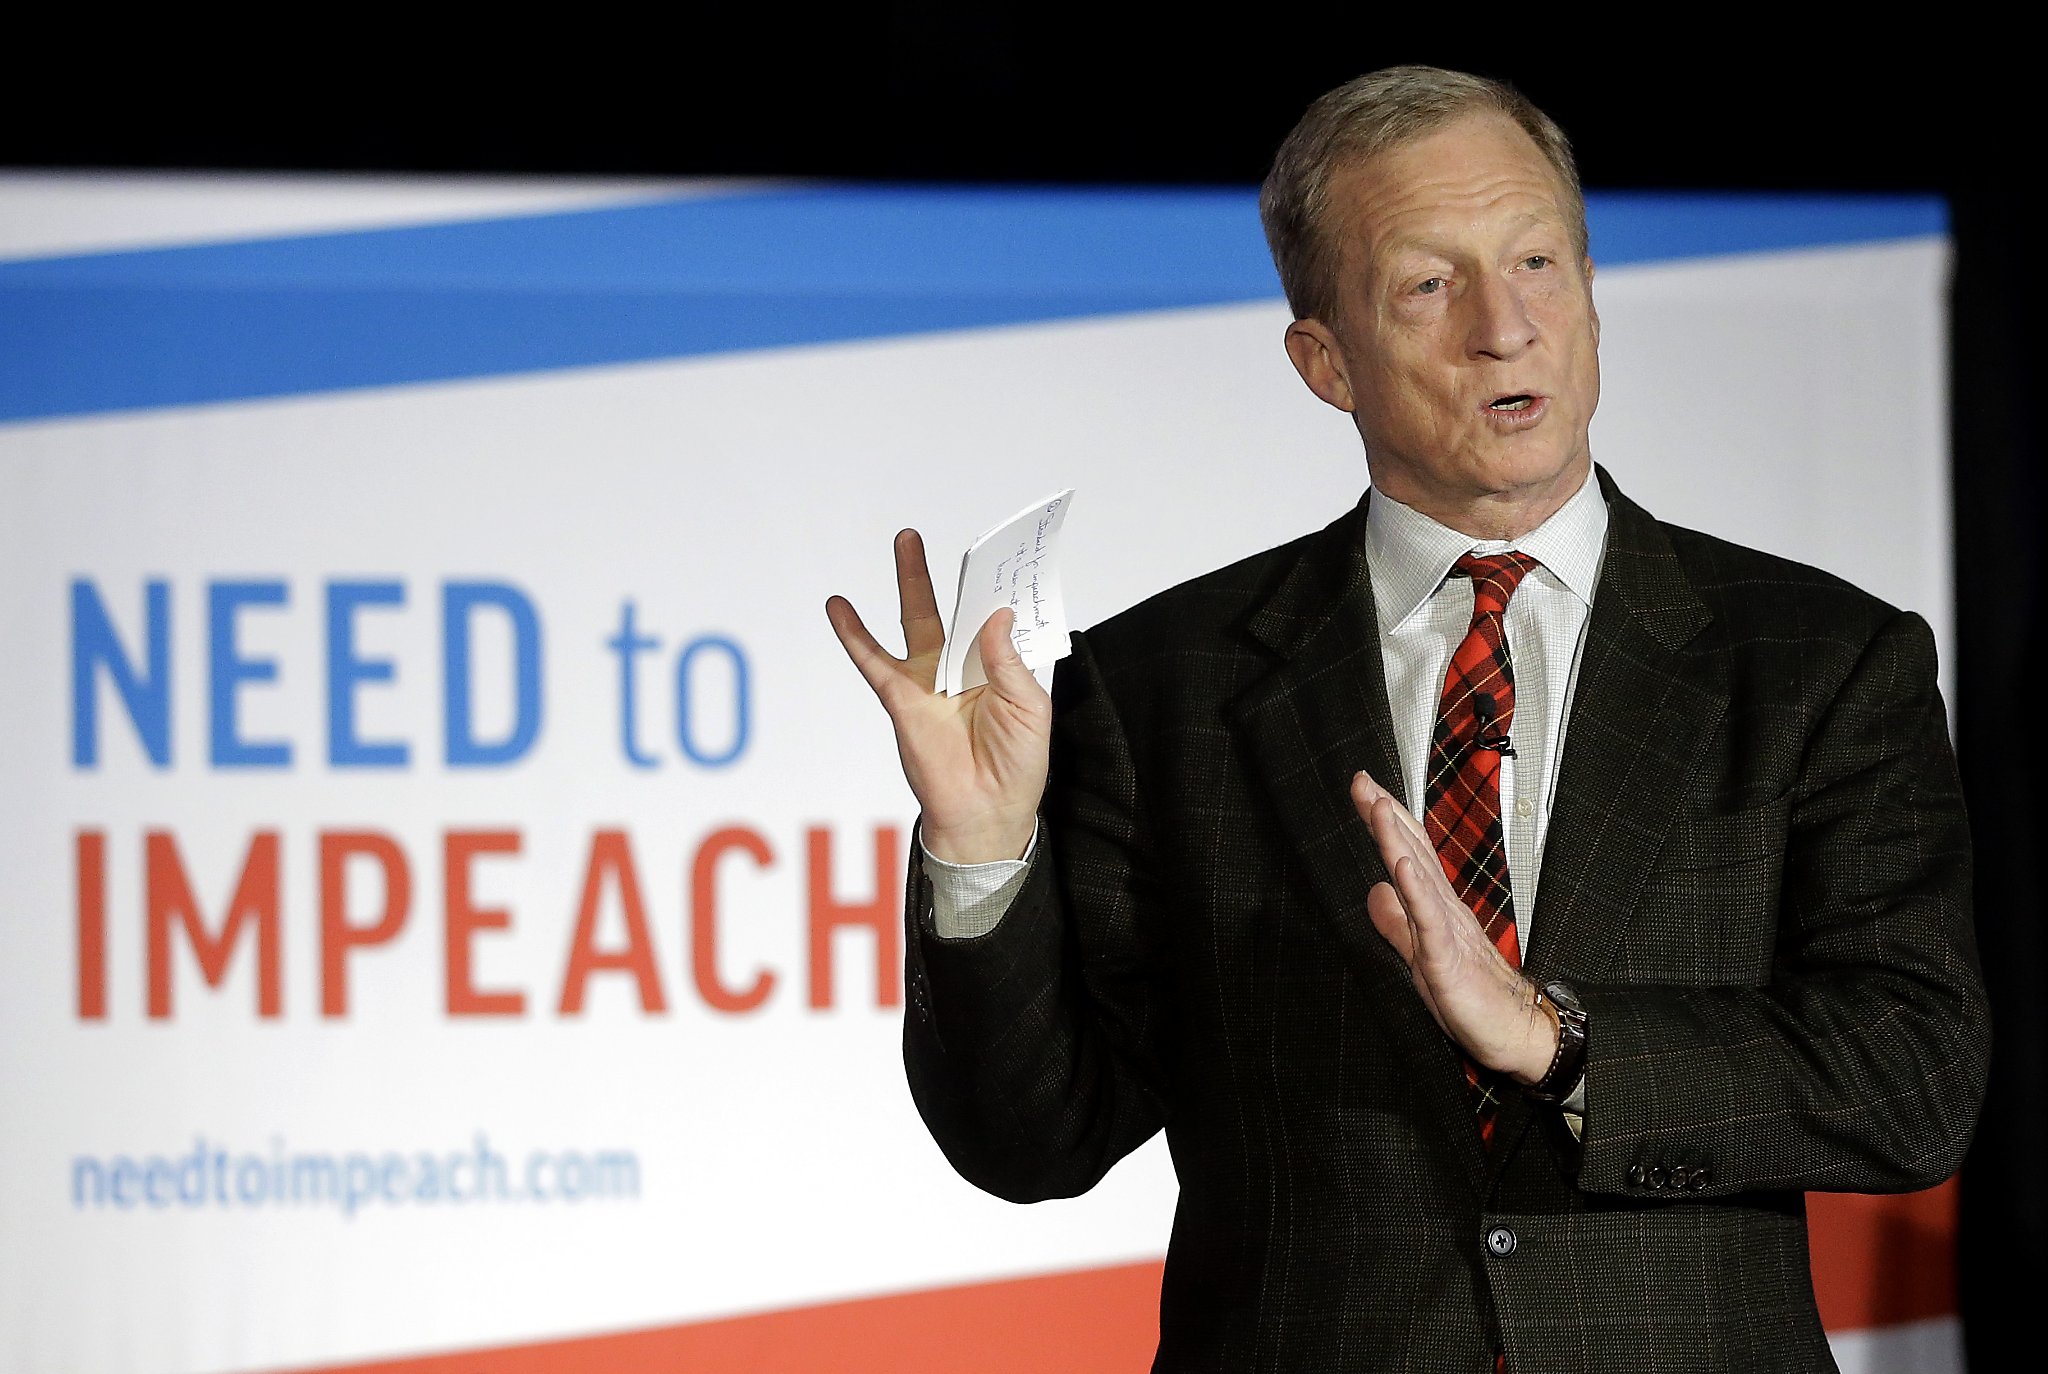 Billionaire San Francisco Democratic donor Tom Steyer may run for president after all ...